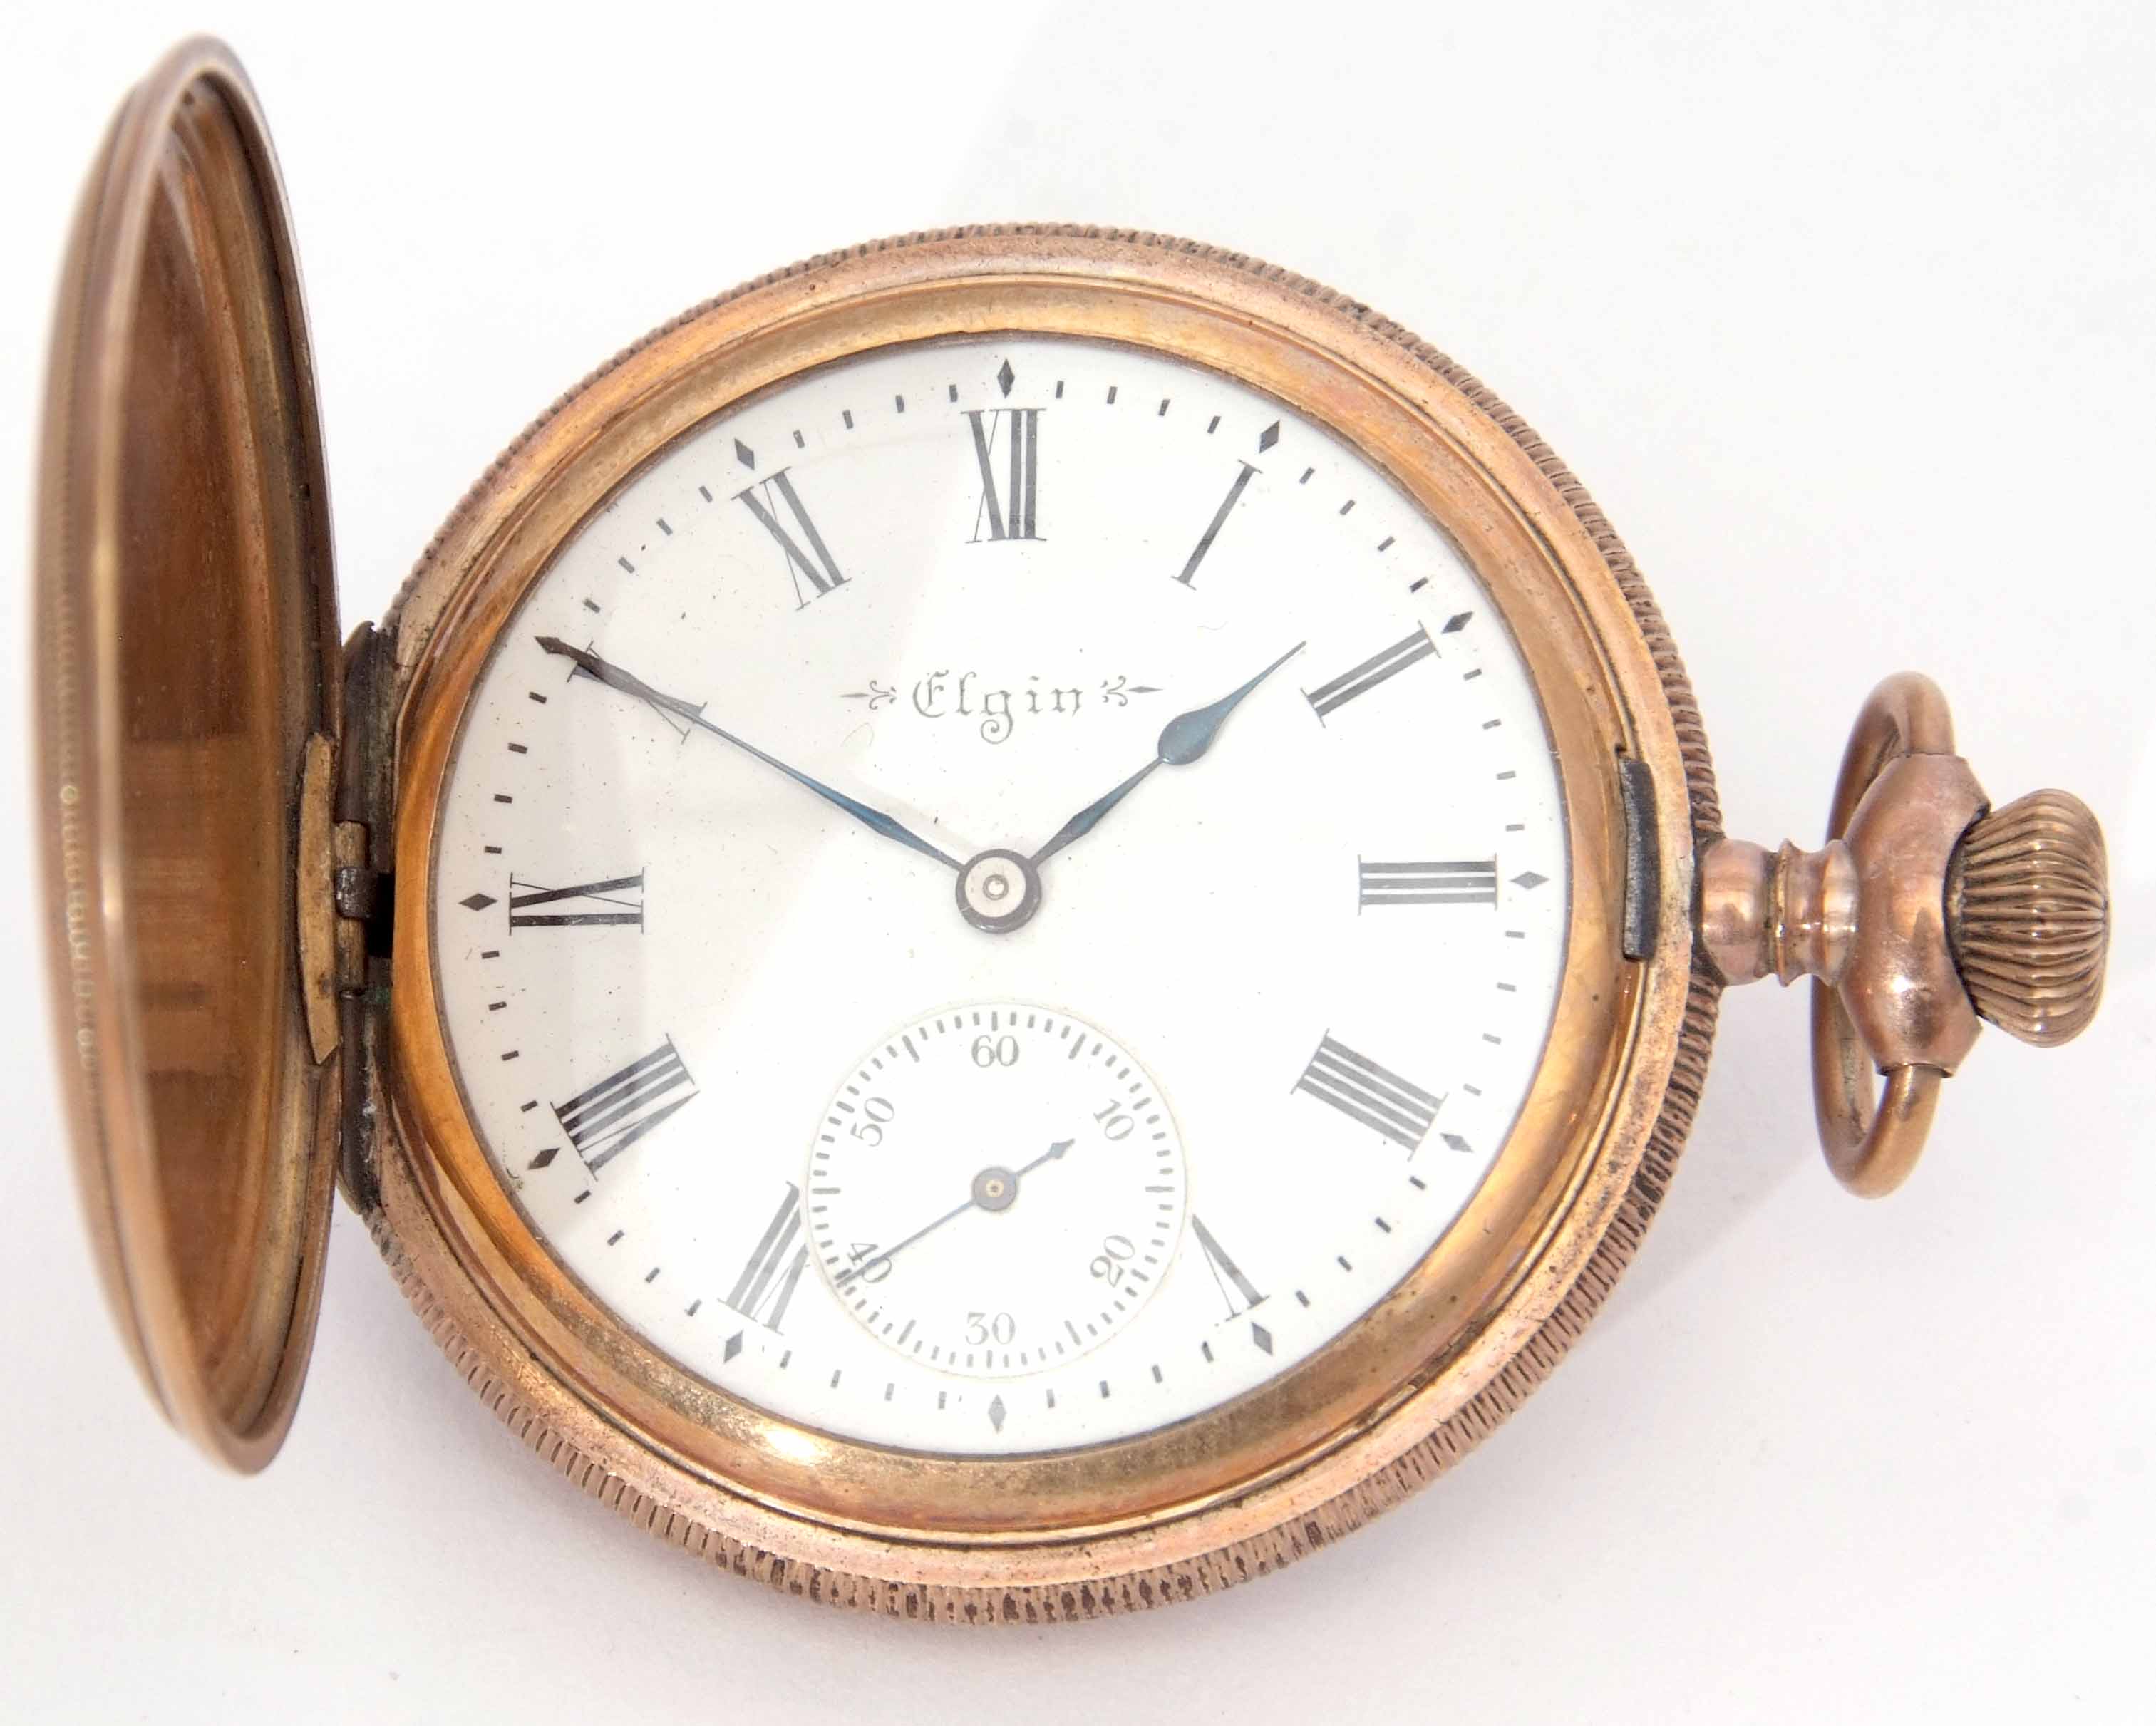 Early 20th century American gold plated full hunter keyless lever watch, Elgin Natl Watch Co,